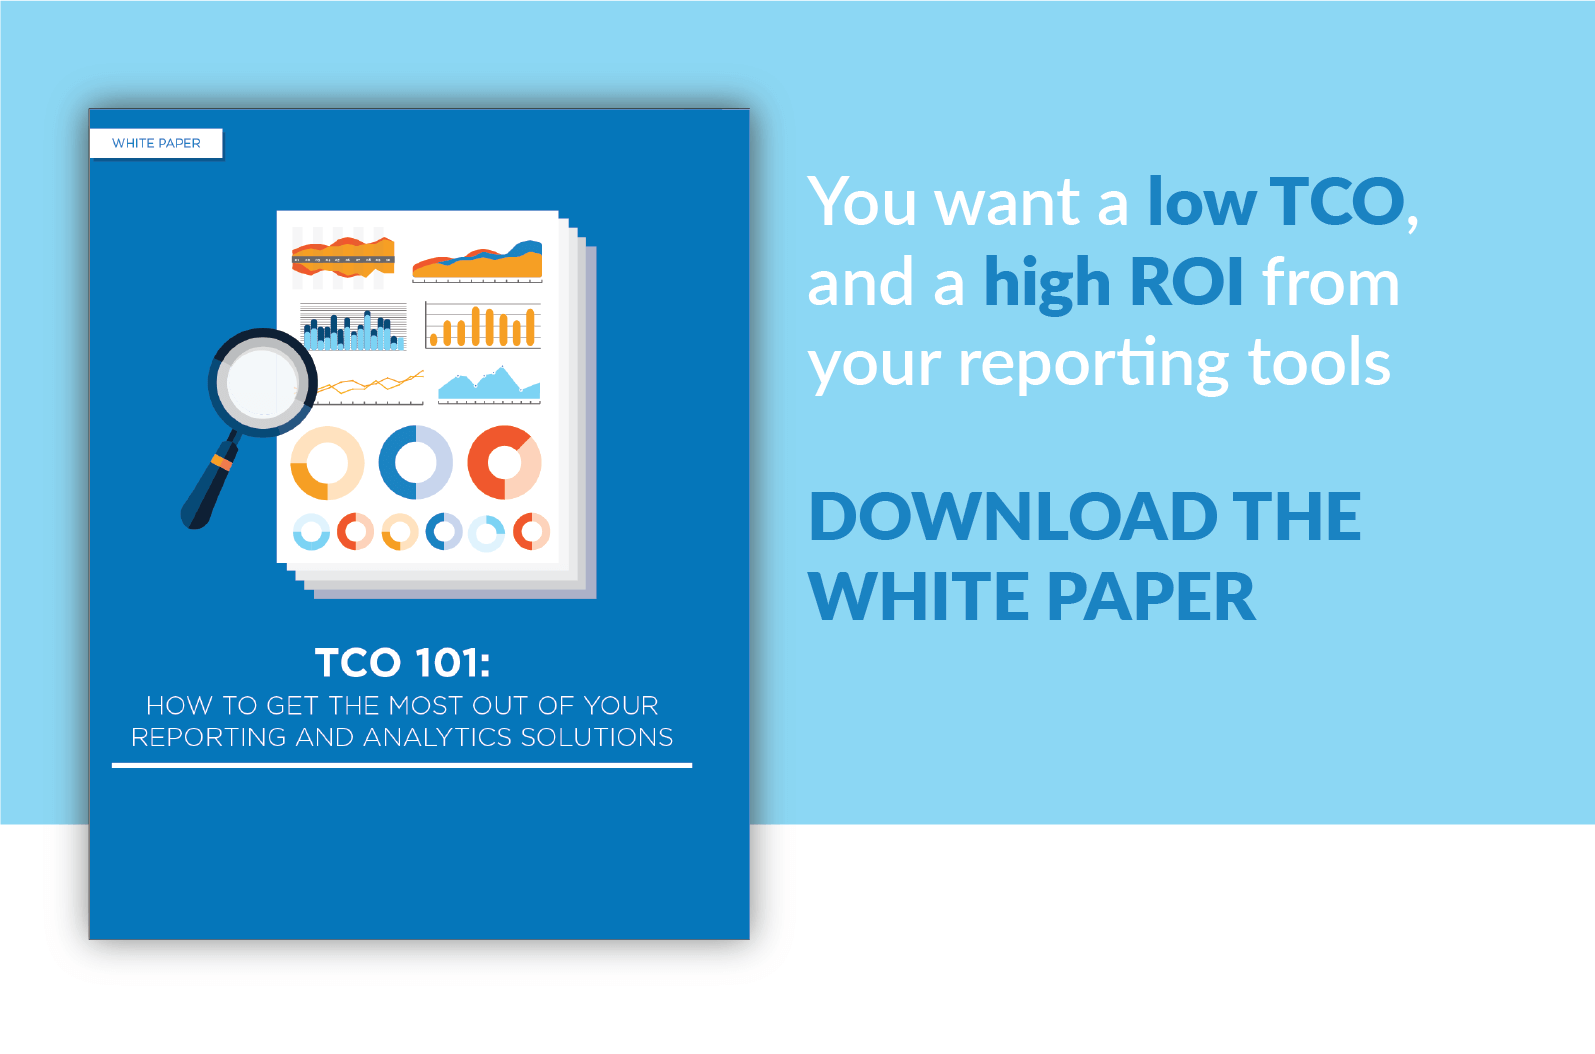 TCO 101: How to get the most out of your reporting and analytics solutions